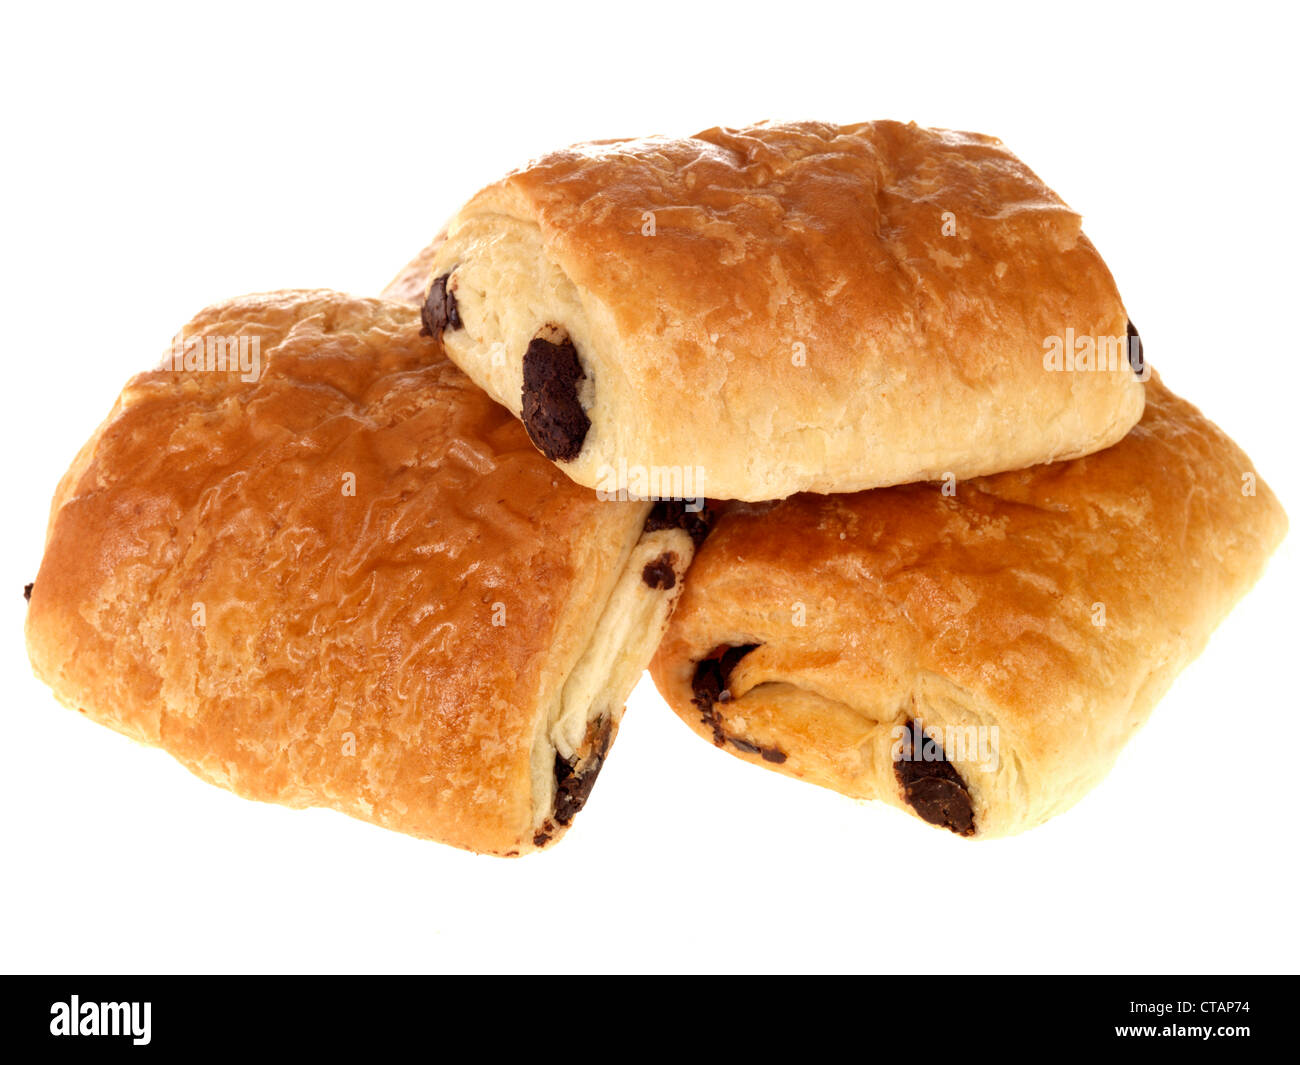 Freshly Baked Pain Aux Chocolate Danish Pastries Ready To Eat, Isolated Against A White Background, With No People Stock Photo